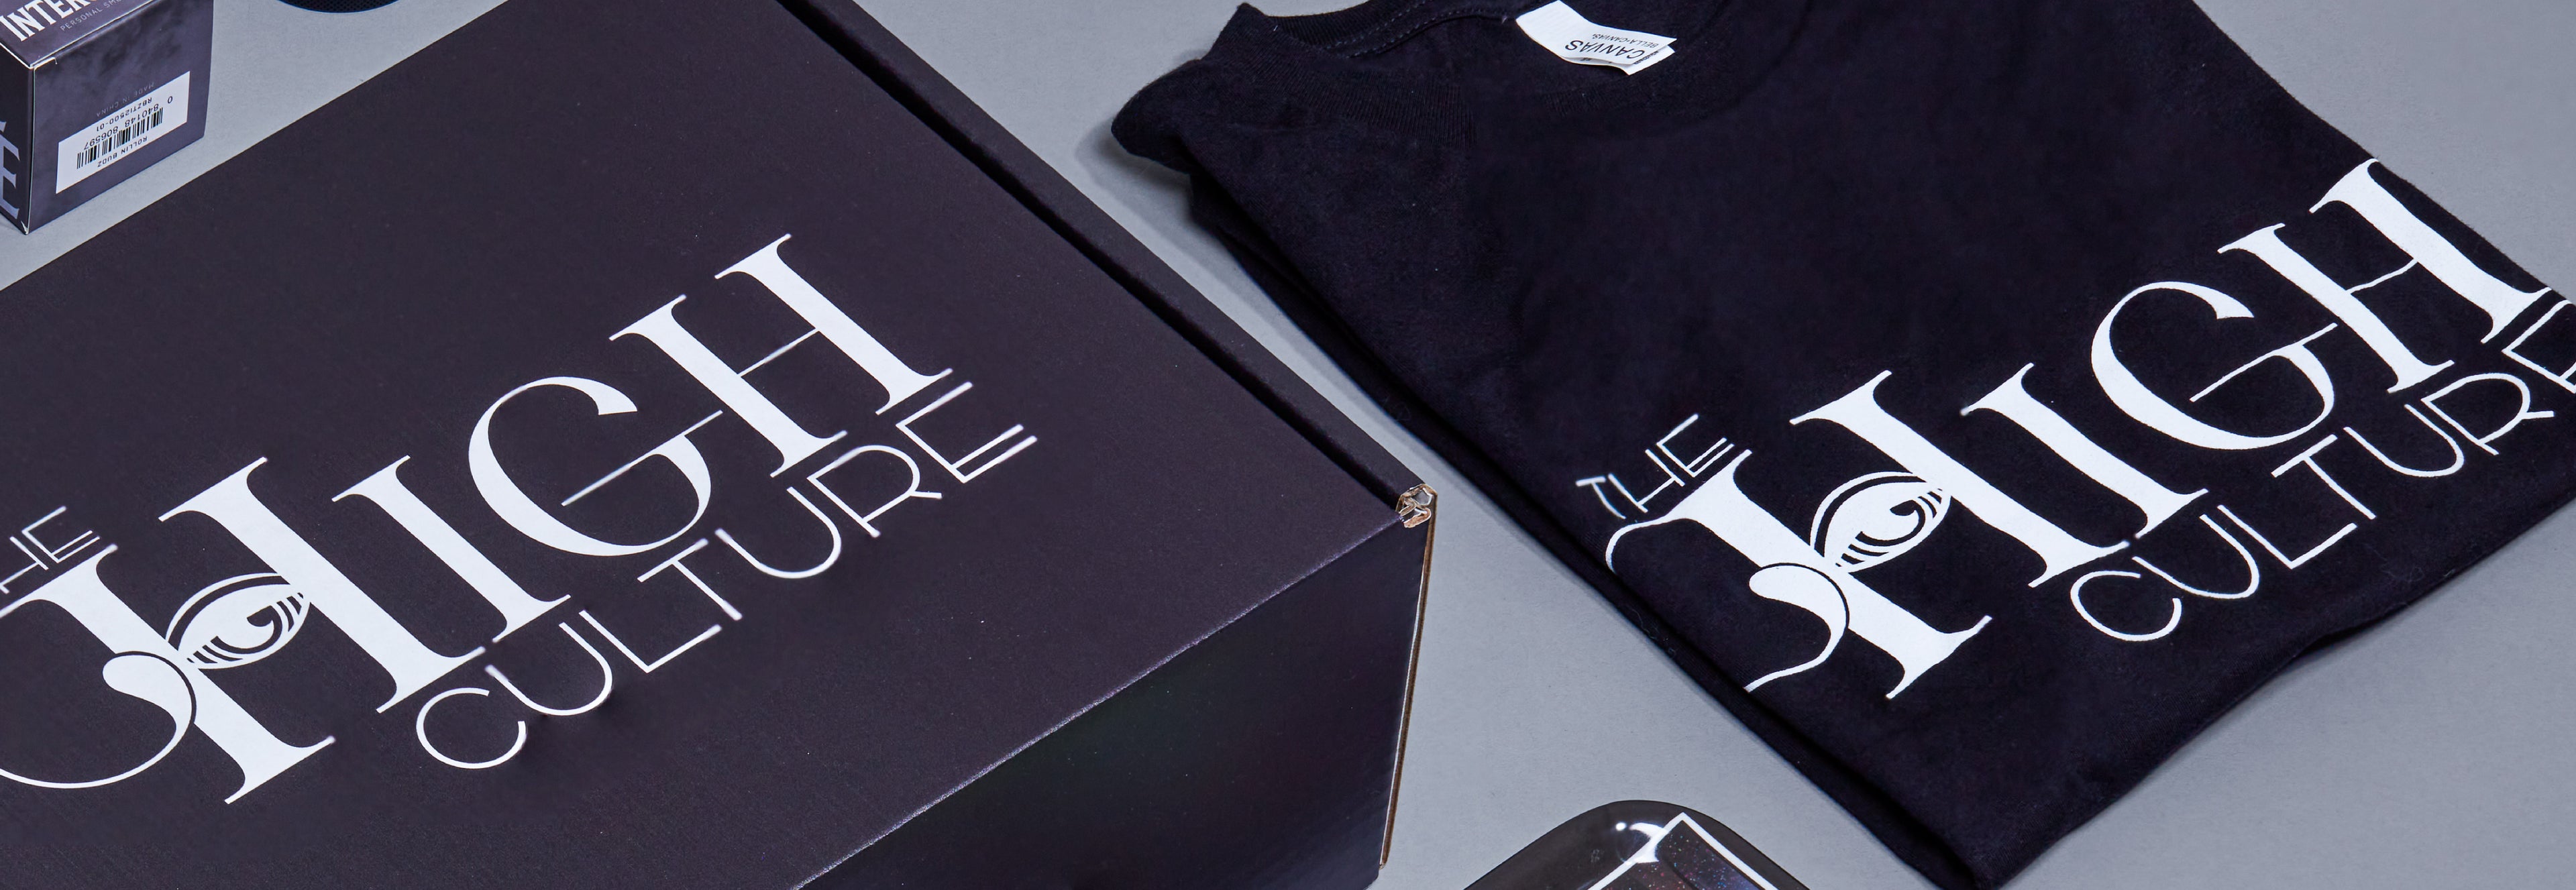 the high culture tshirt and box